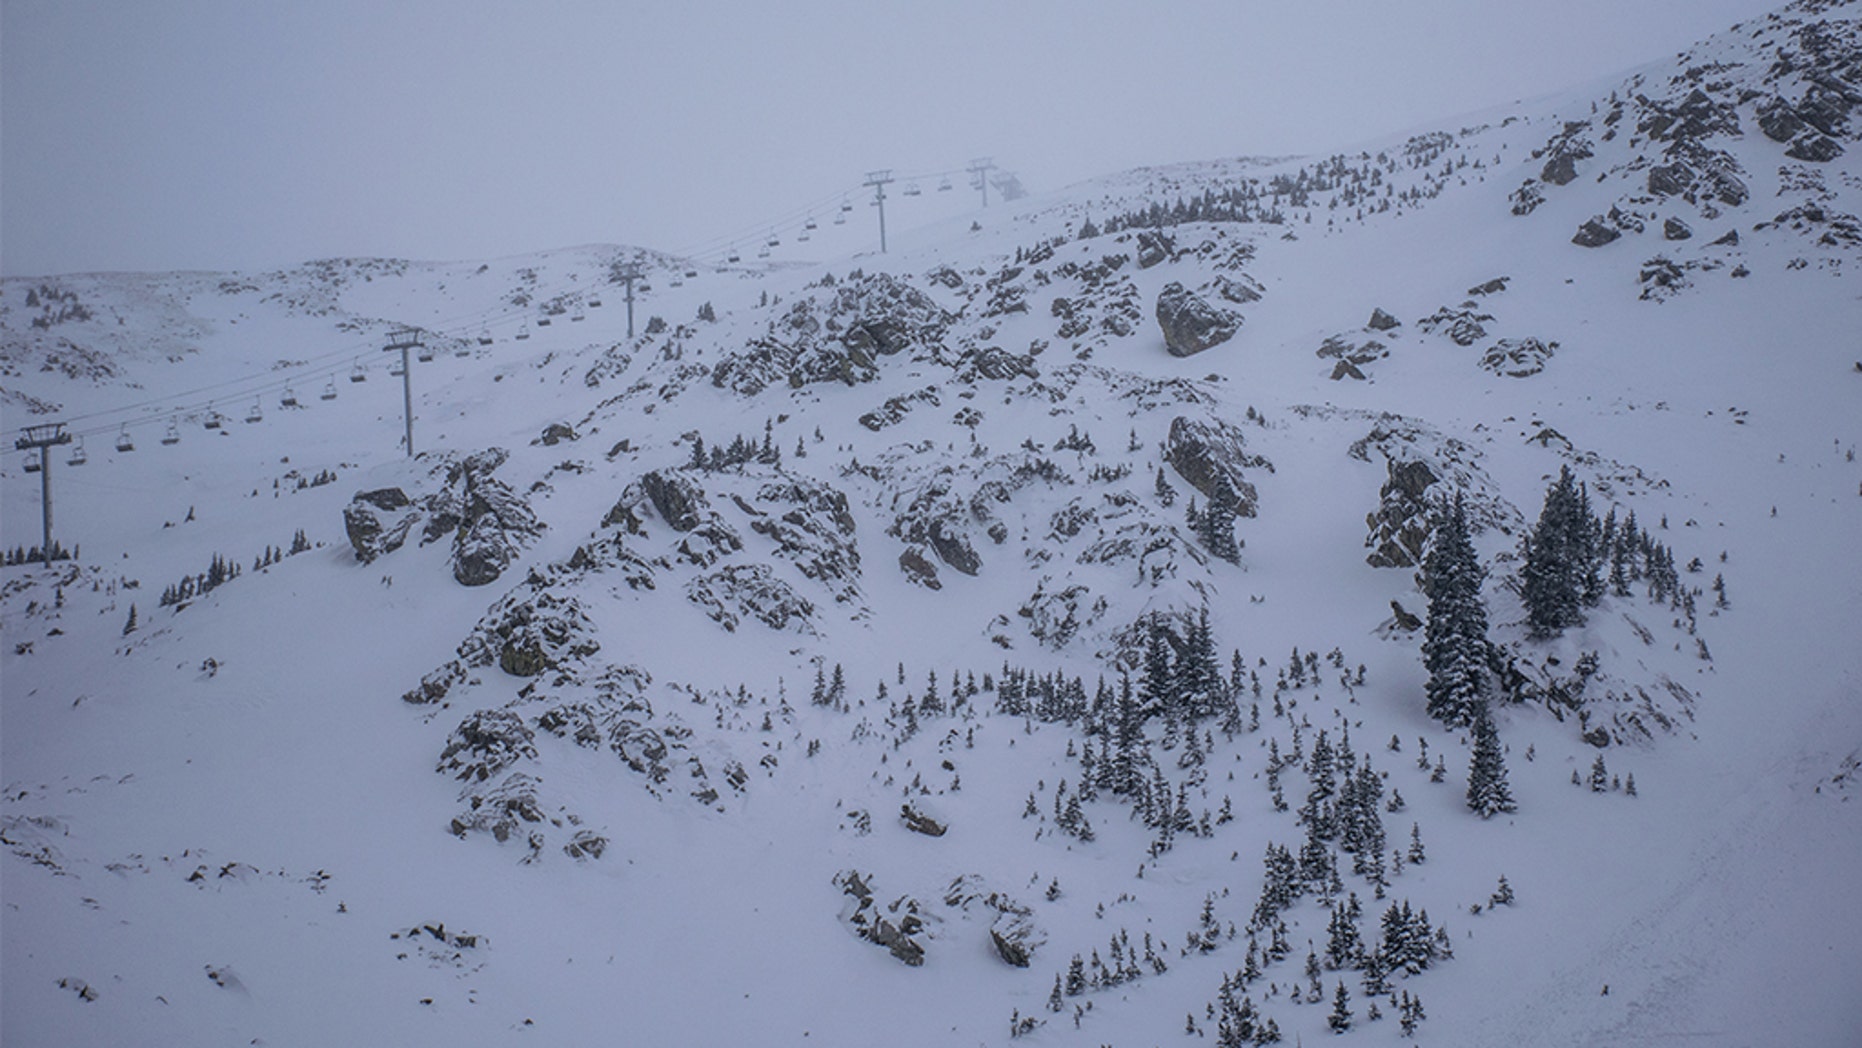 Two pulled from avalanche at New Mexico ski resort, search ongoing for others, officials say